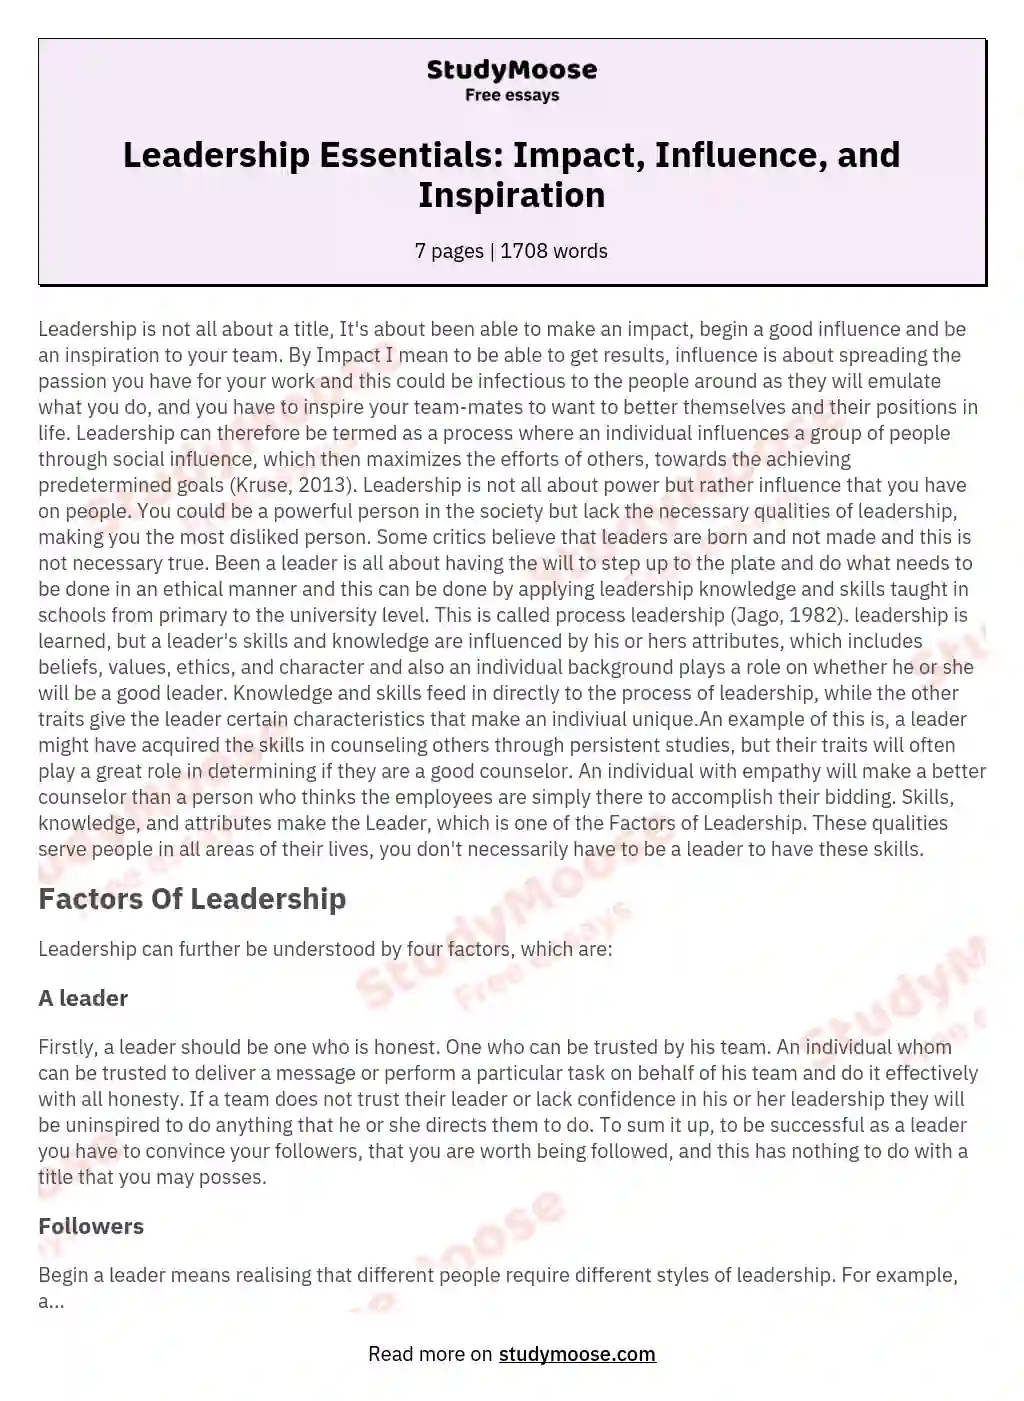 Leadership Essentials: Impact, Influence, and Inspiration essay